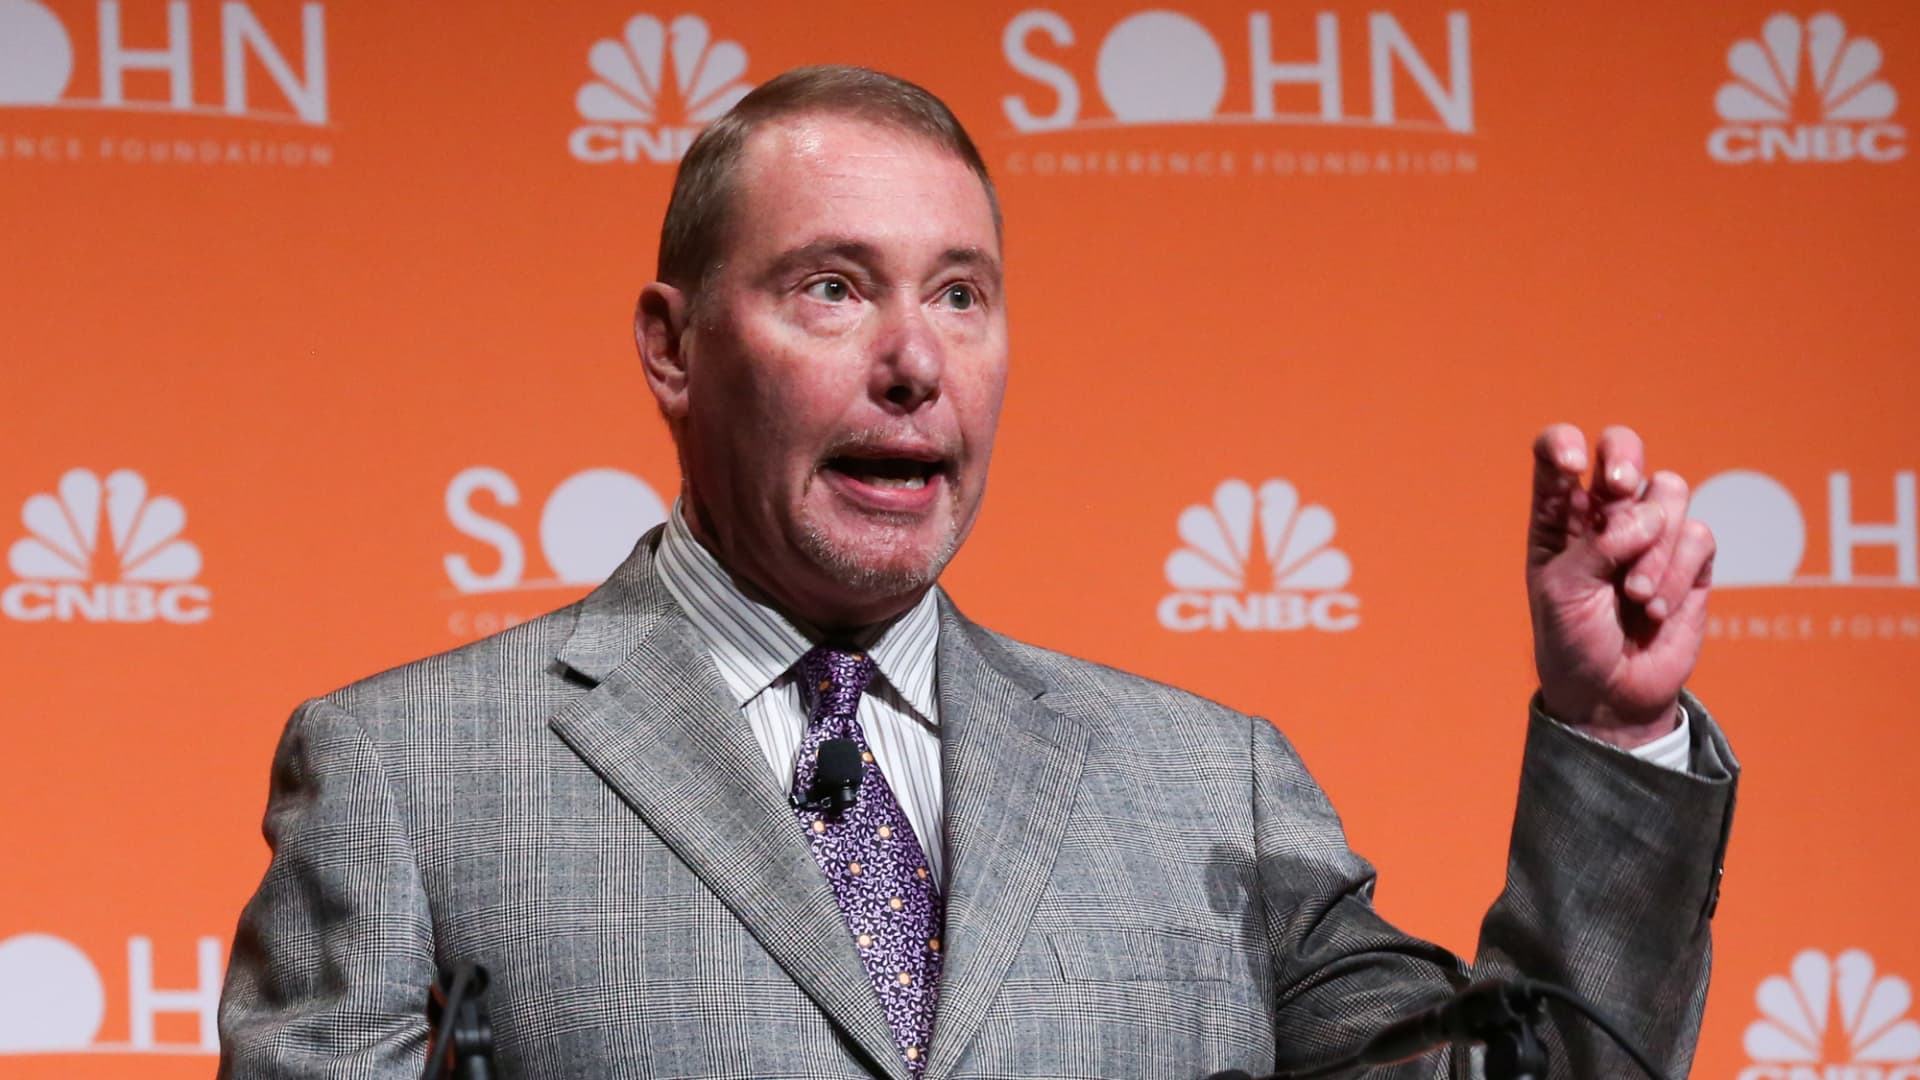 Jeffrey Gundlach says he would buy bitcoin over gold in the short term